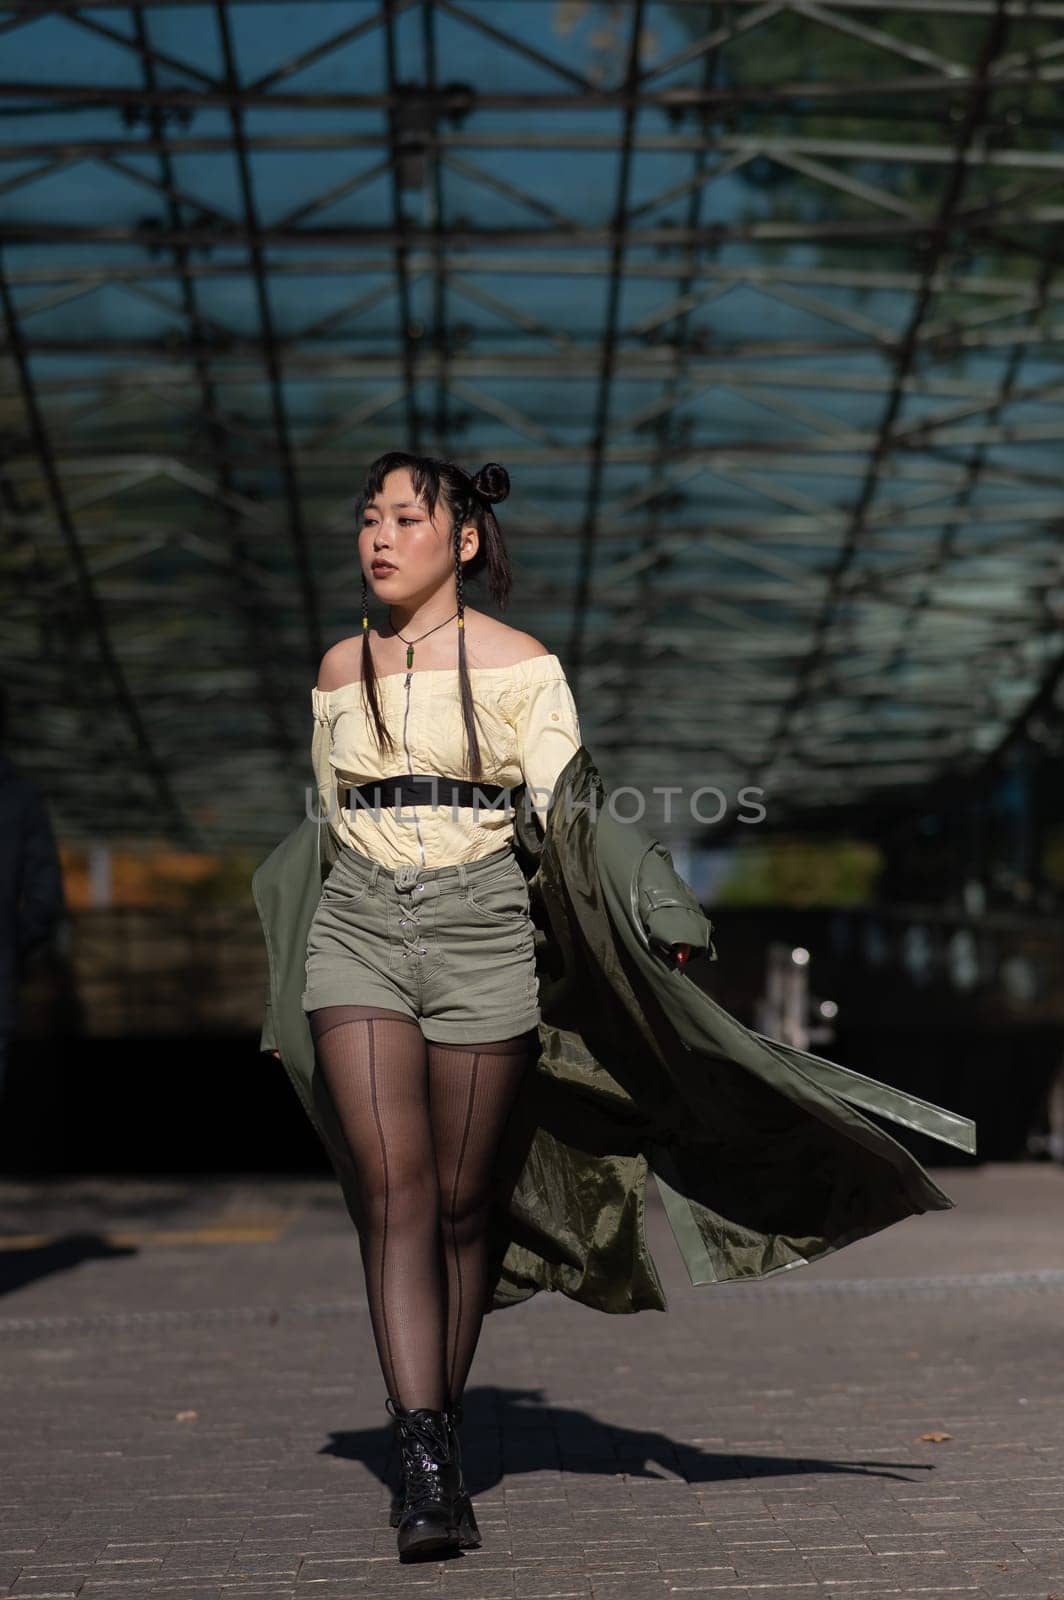 A beautiful Asian woman in shorts and a green leather coat comes out of the subway